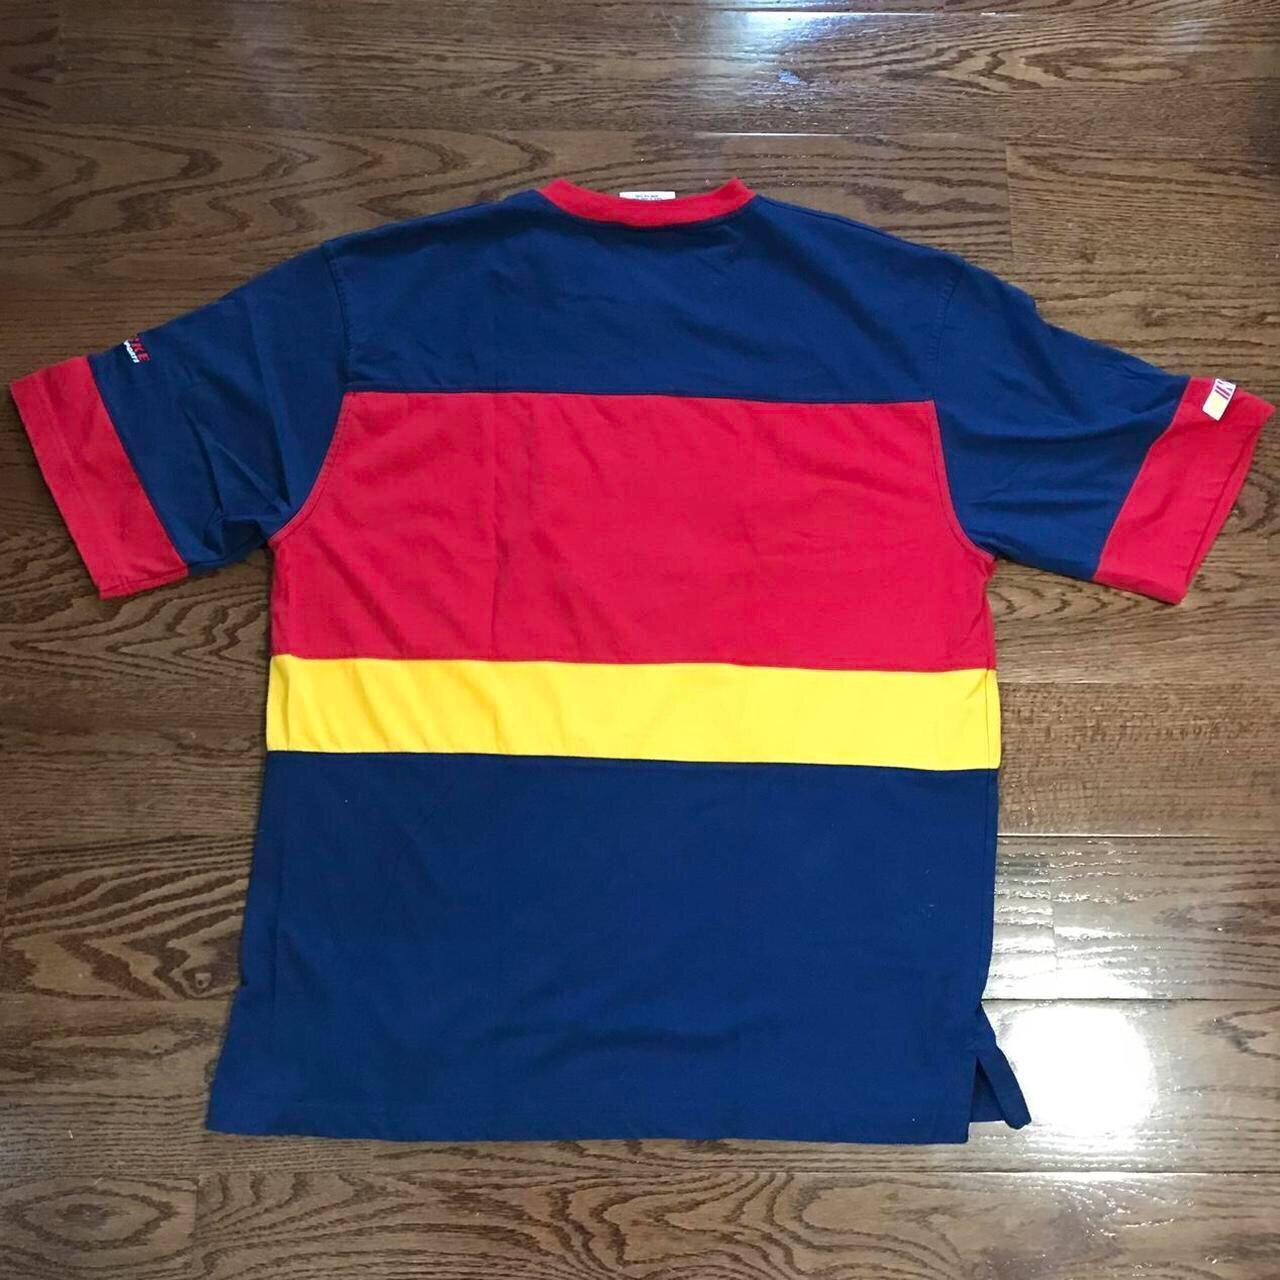 Chase Authentics Men's Navy and Red Shirt (2)